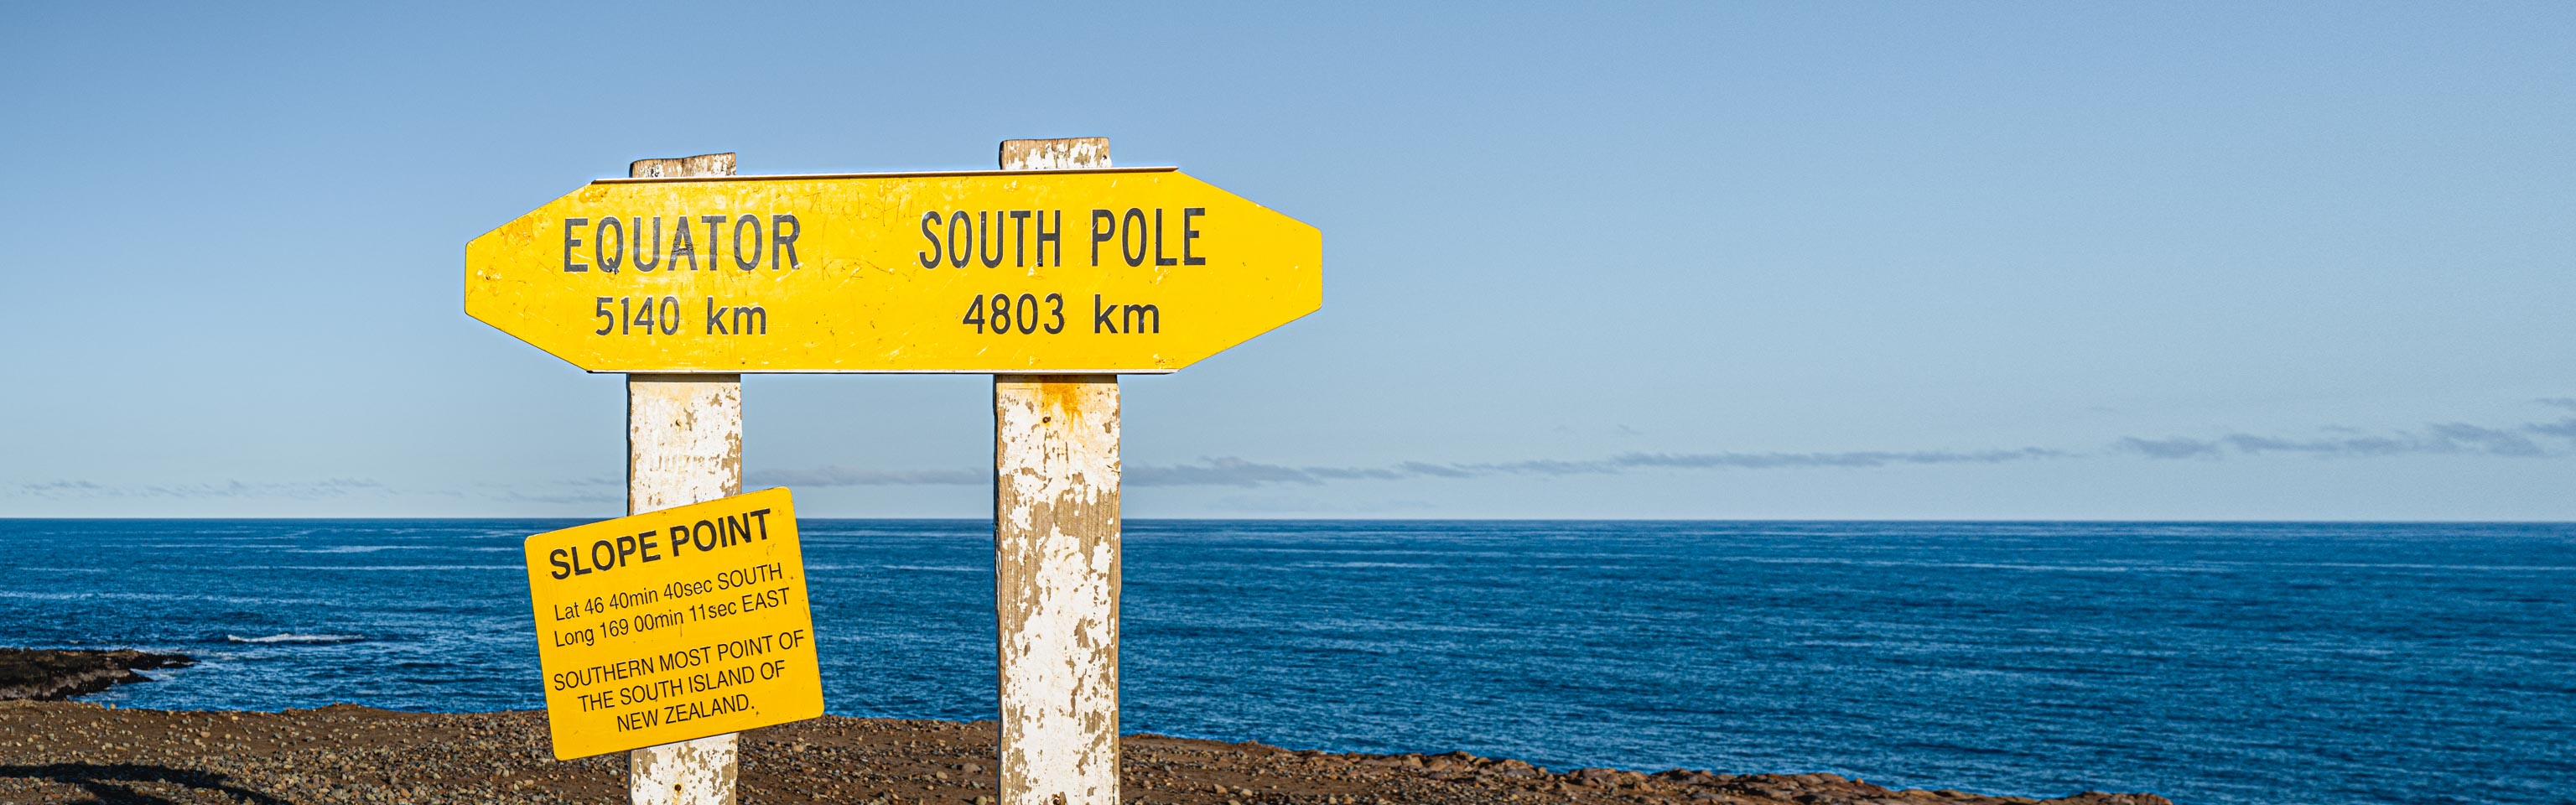 Slope Point, New Zealand's southernmost point